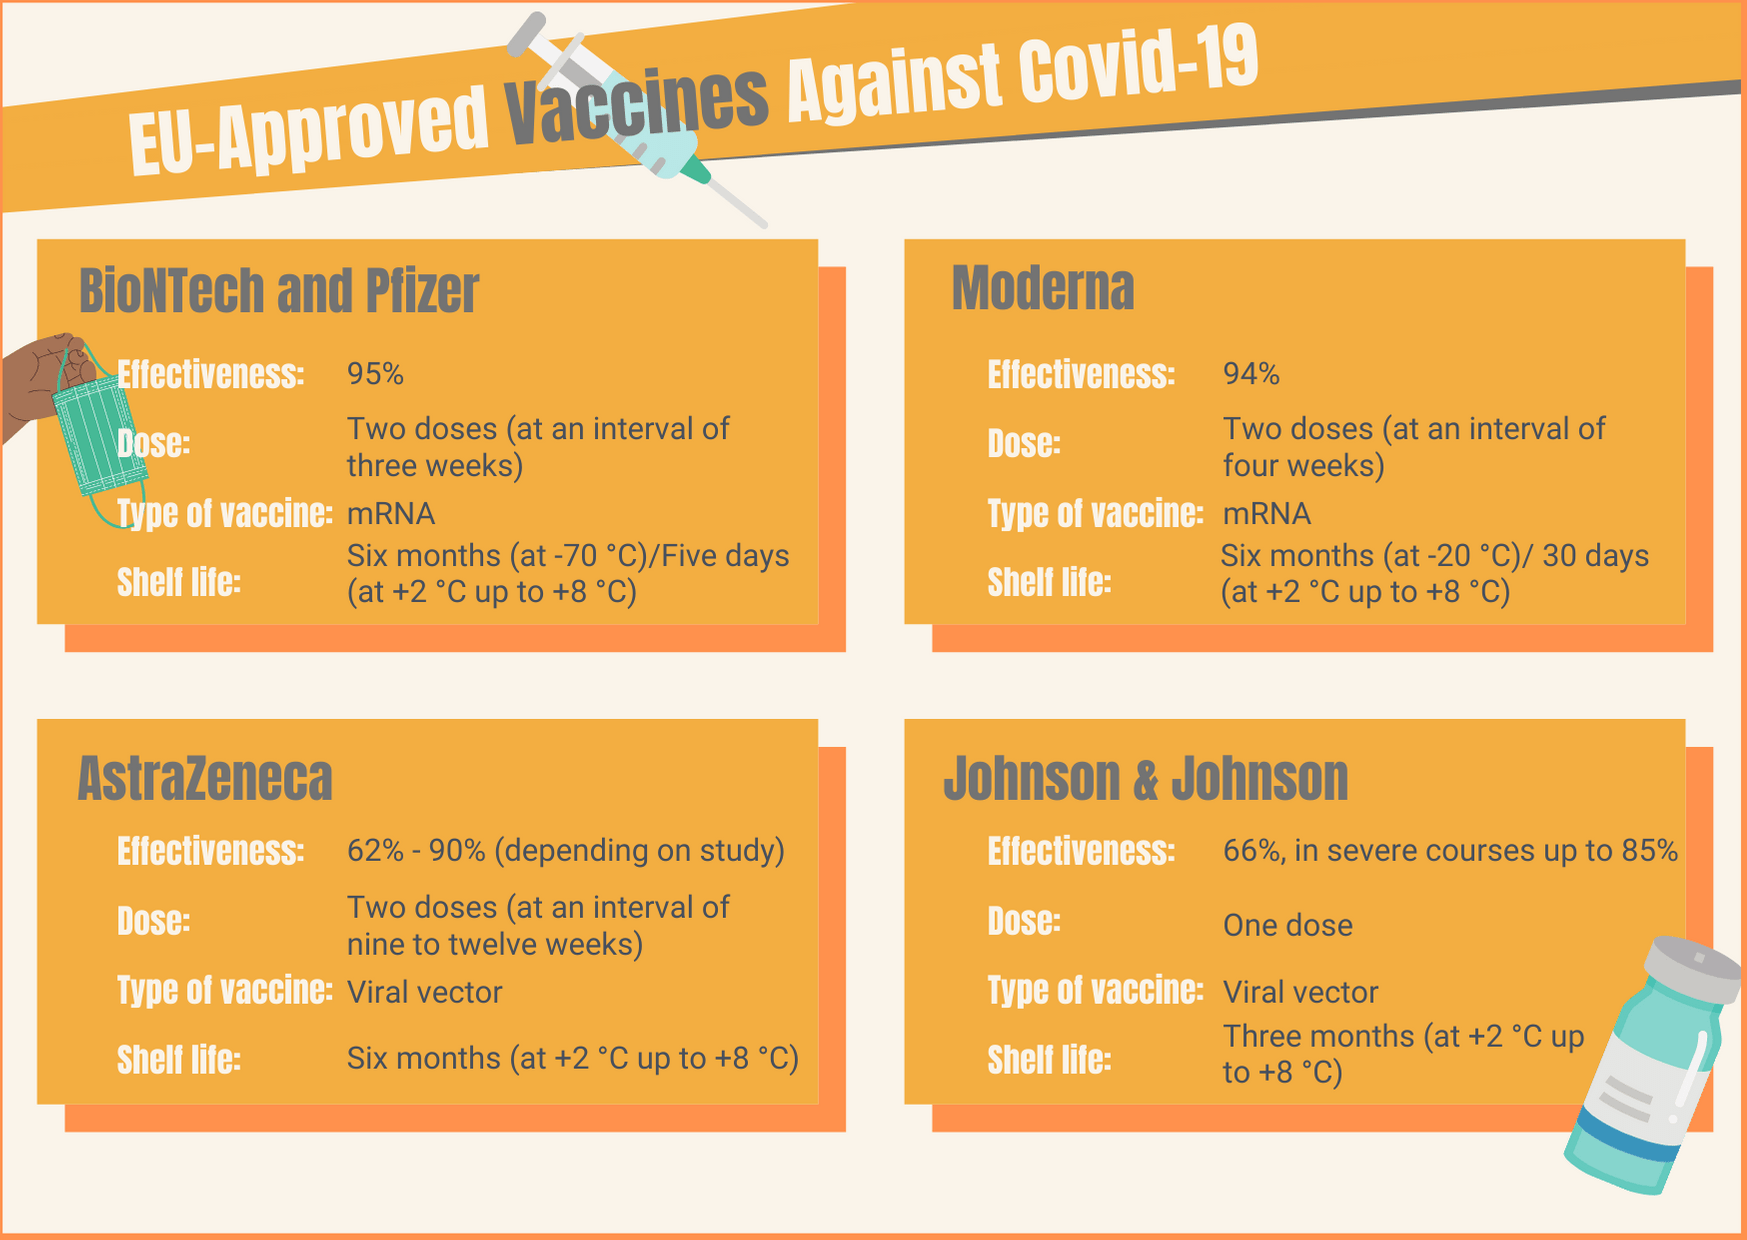 EU-Approved Vaccines against Covid-19